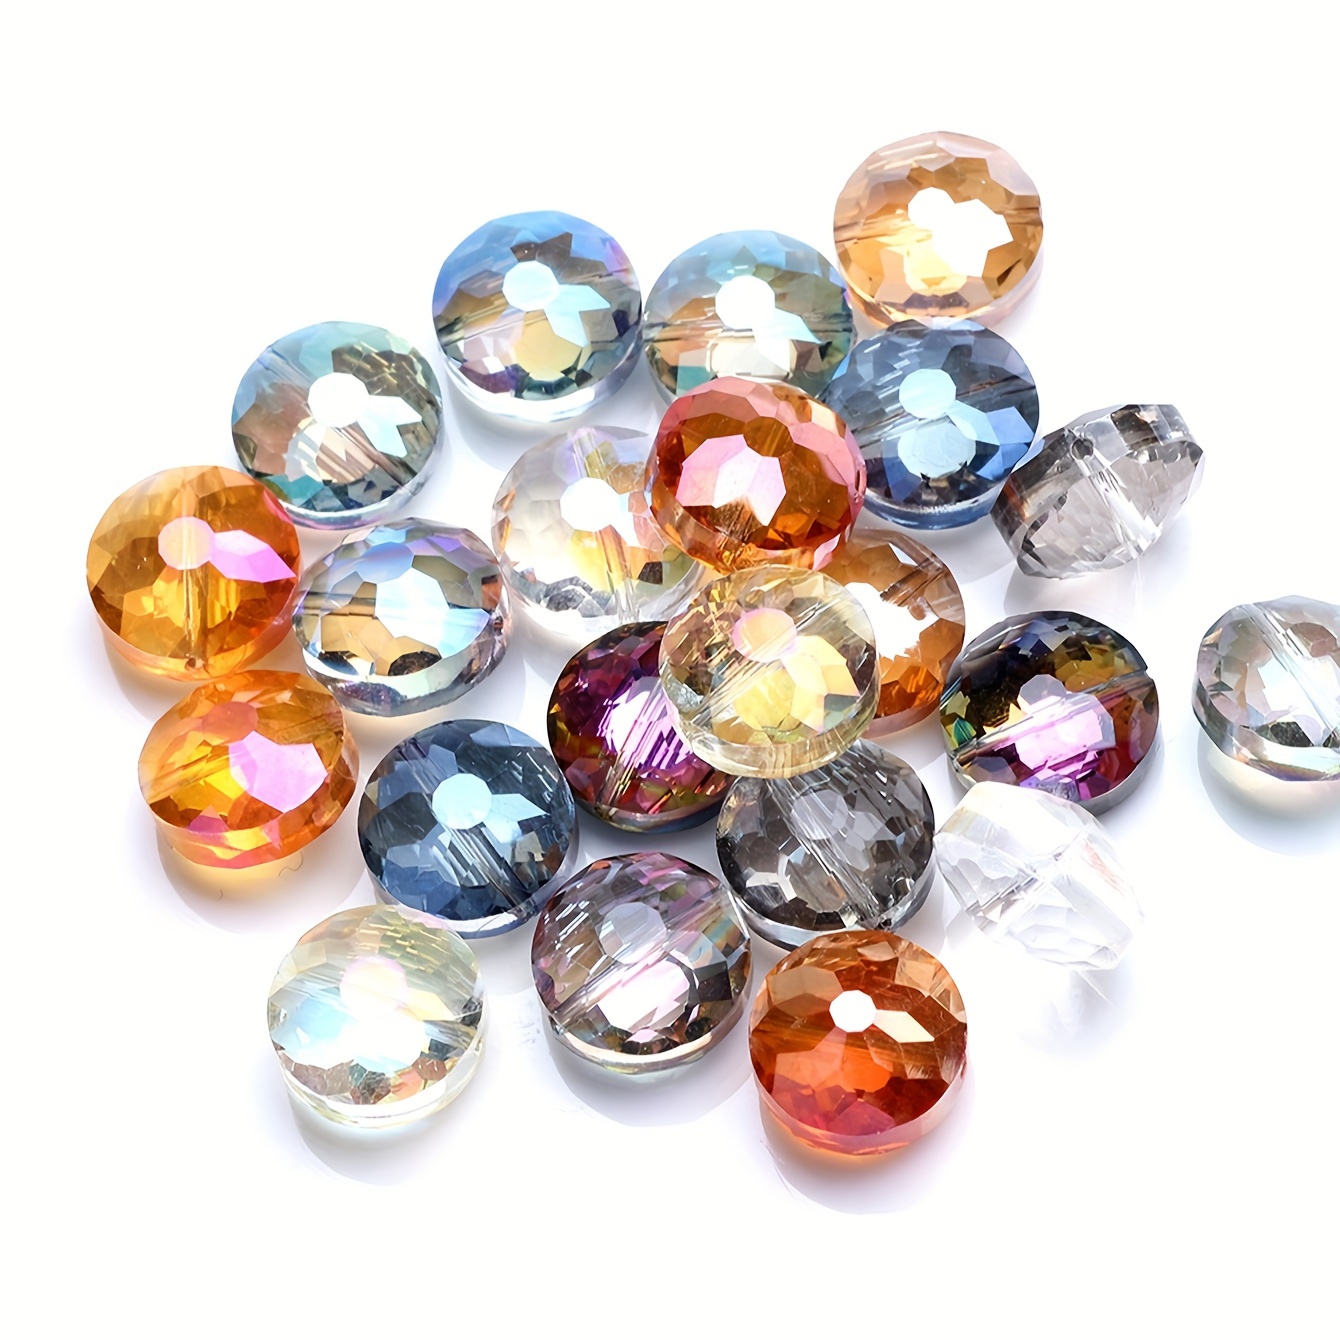 

10pcs 14mm Bird's Nest Crystal Glass Electroplated Iridescent Color Flat Round Cut Surface Beads For Jewelry Making Diy Earrings Bracelets Necklaces Accessories